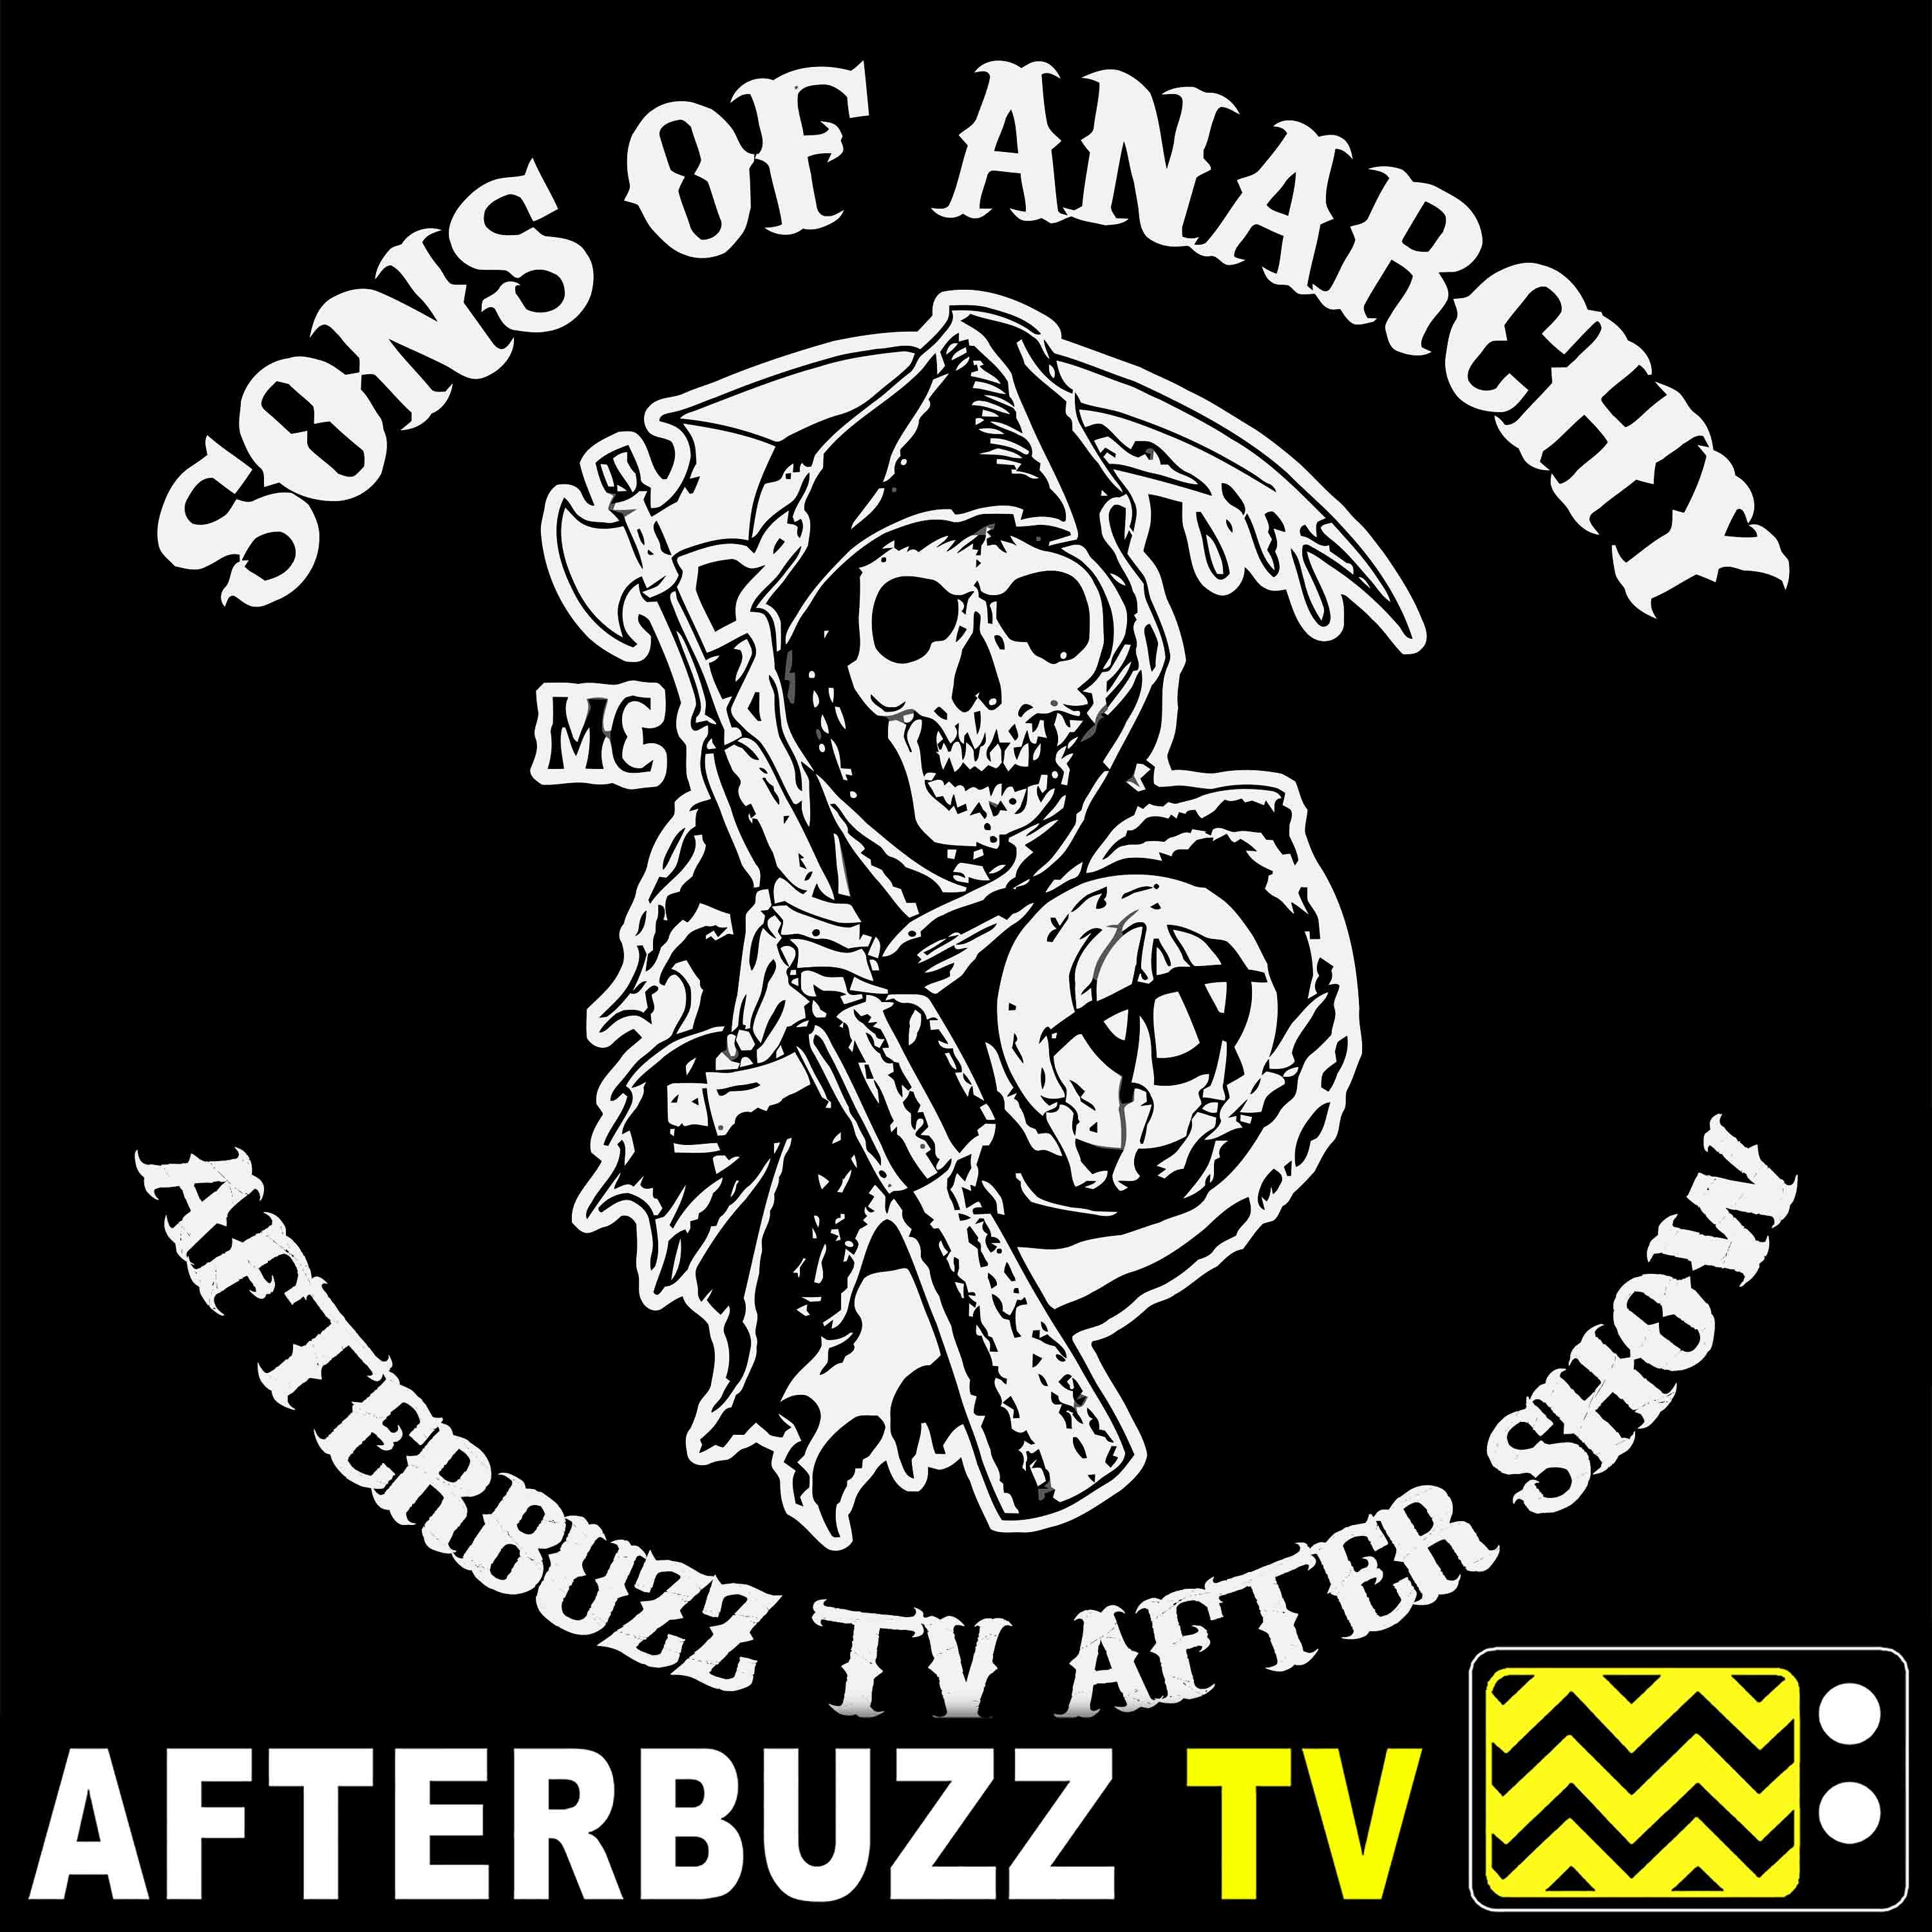 Sons of Anarchy S:7 | Poor Little Lambs E:4 | AfterBuzz TV AfterShow